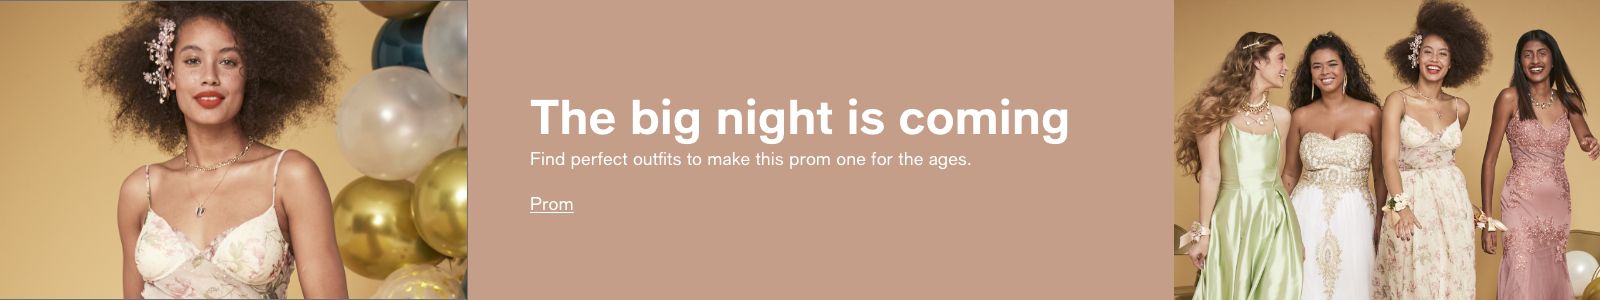 The big night is coming, find perfect outfits to make this prom one for the ages